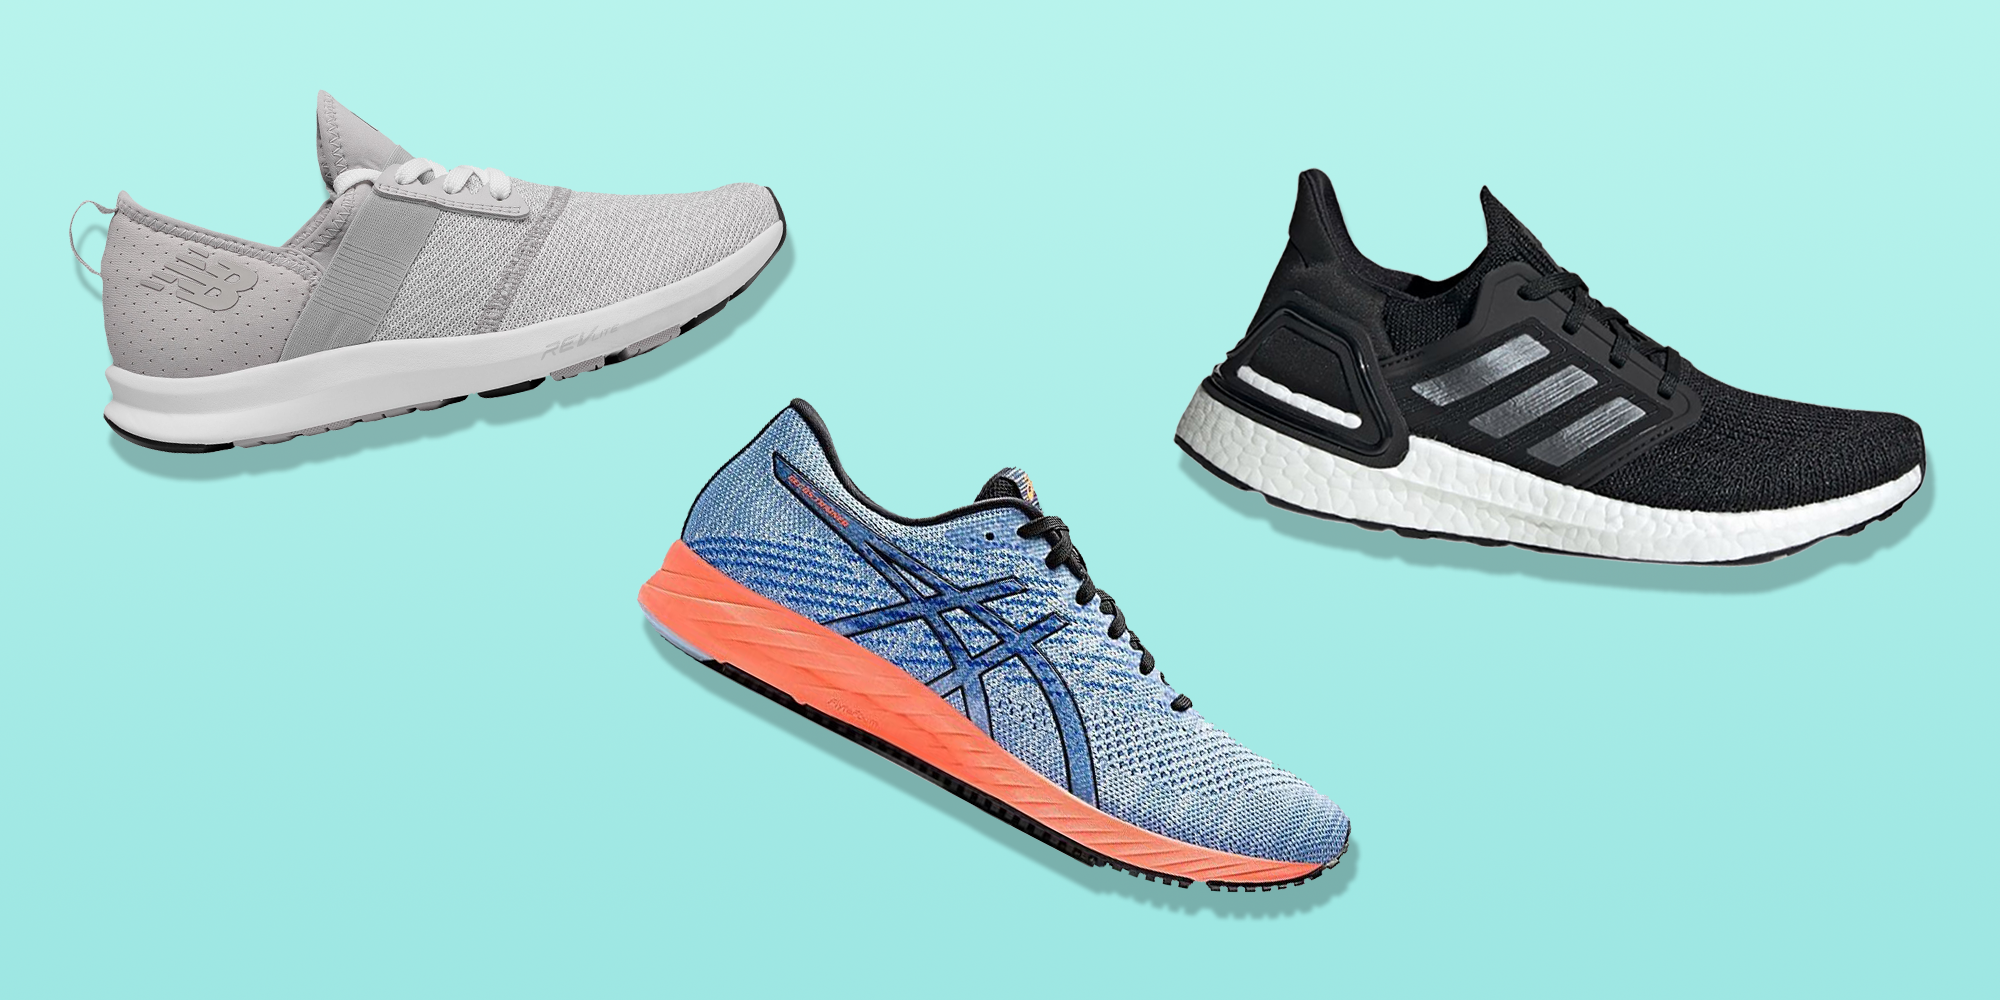 inexpensive workout shoes